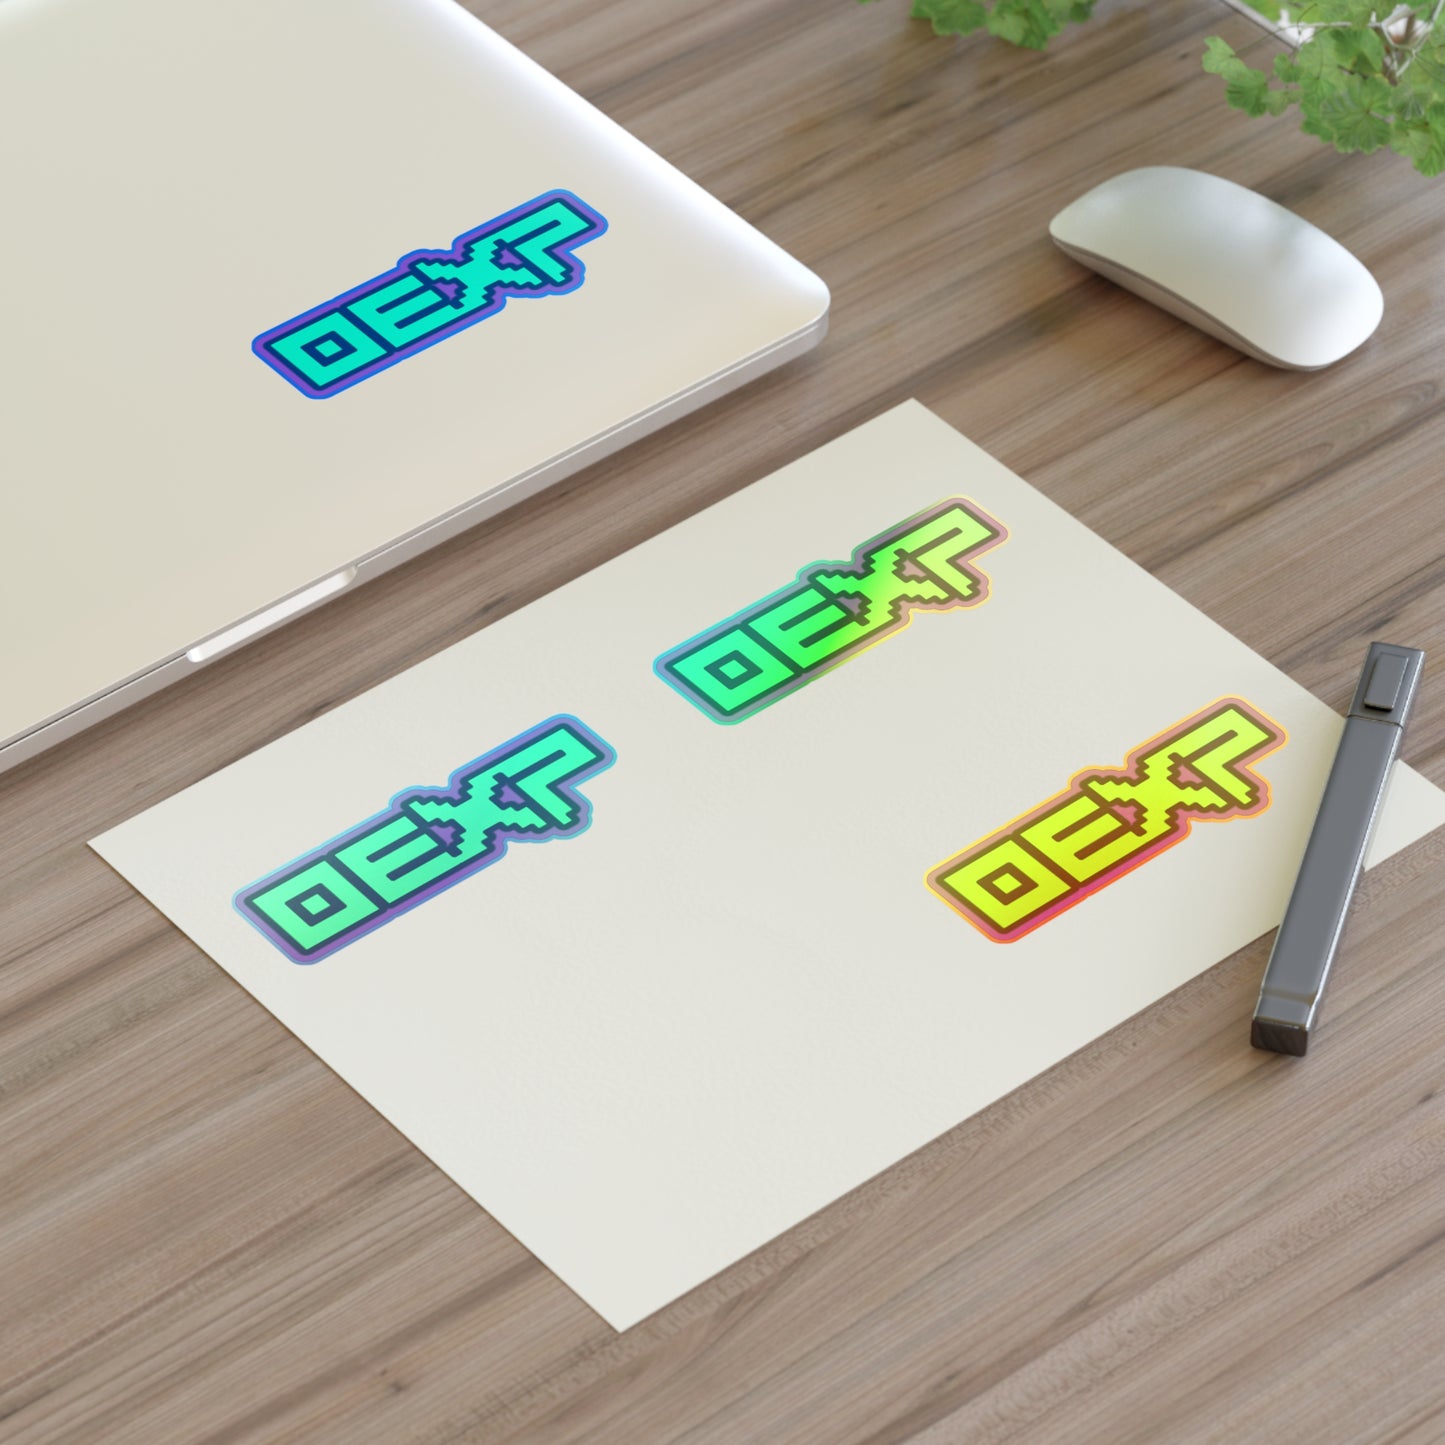 Zr0XPerience Sticker Sheets